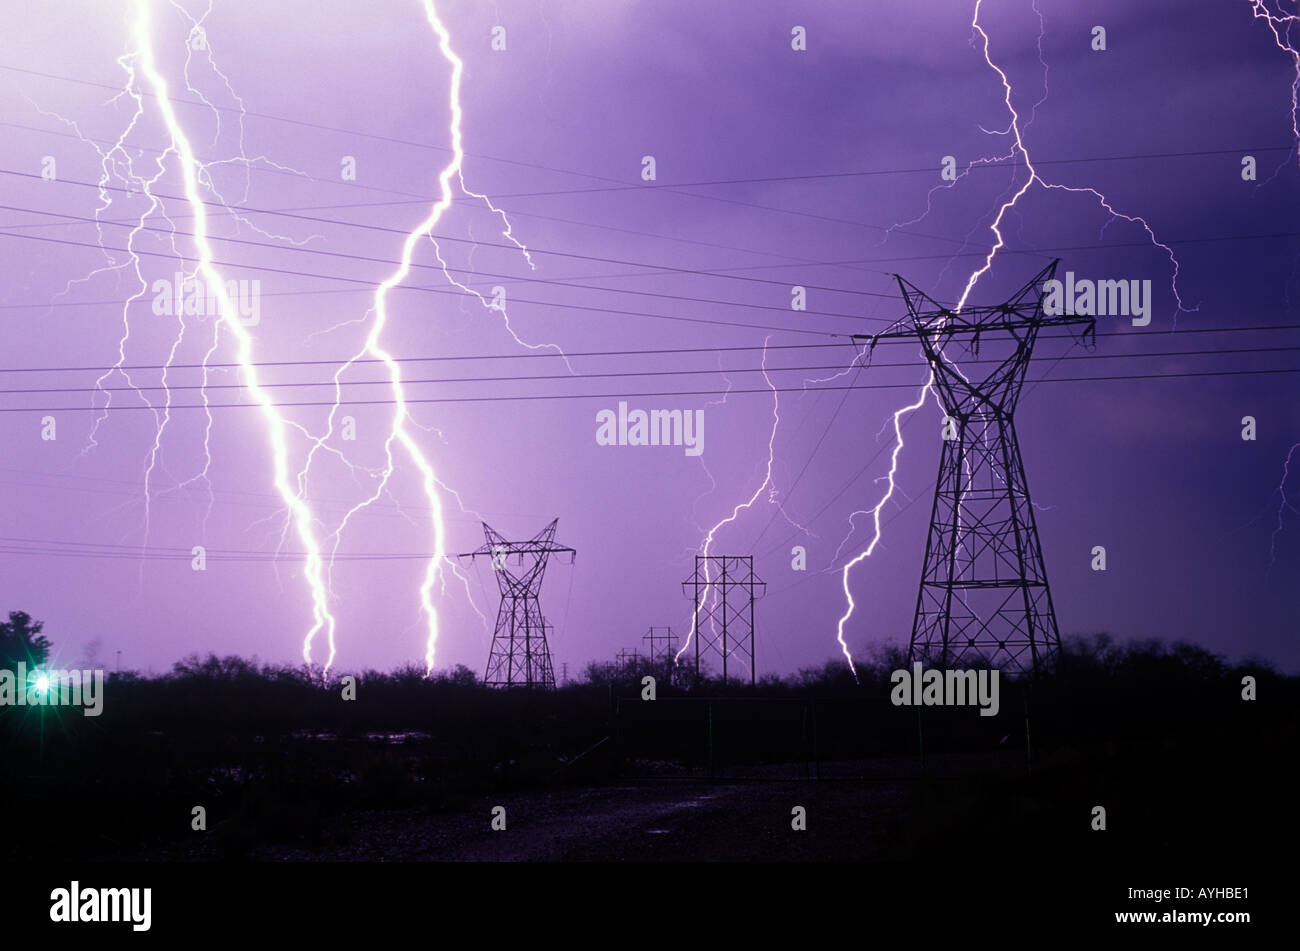 Large lightning bolts strike near power lines during a summer monsoon storm with purple sky in Vail, Arizona, United States. Stock Photo